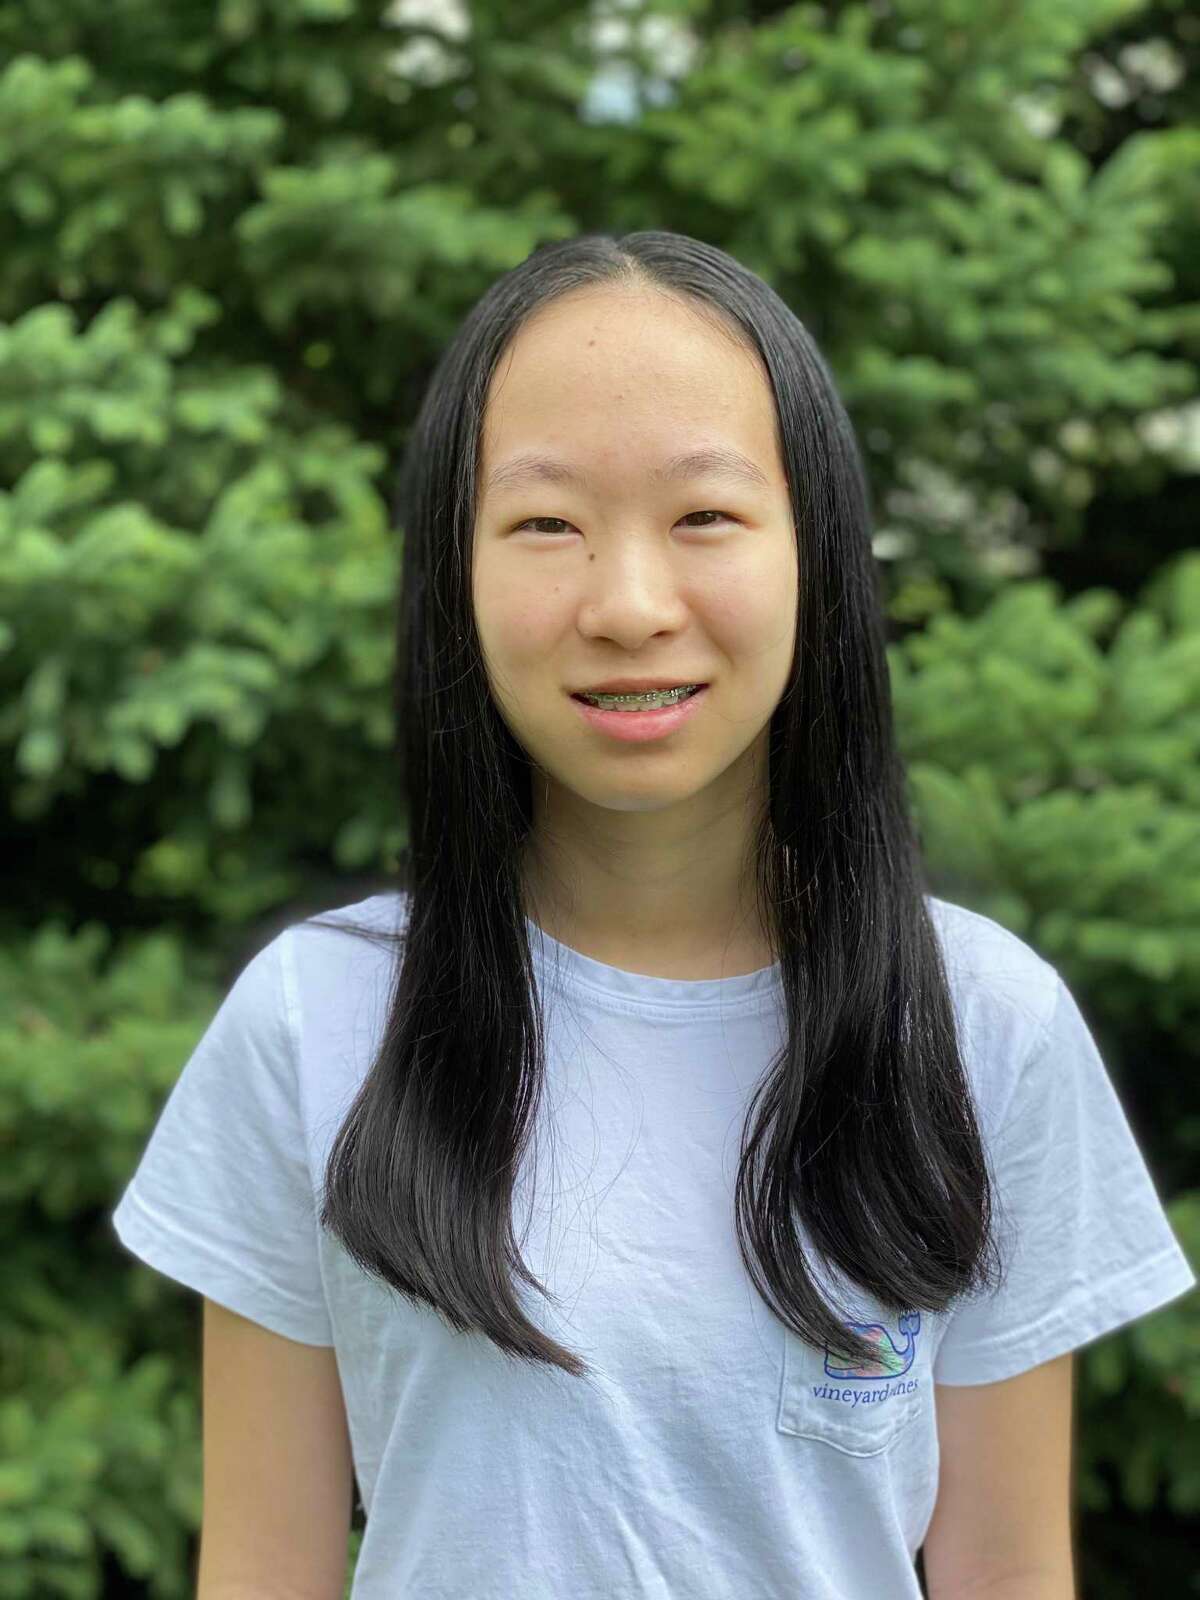 Hannah Guan, a 15-year-old student at charter school BASIS San Antonio-Shavano Campus, will be honored with the First Lady’s Rising Star Volunteer Award at the Governor's Volunteer Awards online ceremony Nov. 3.